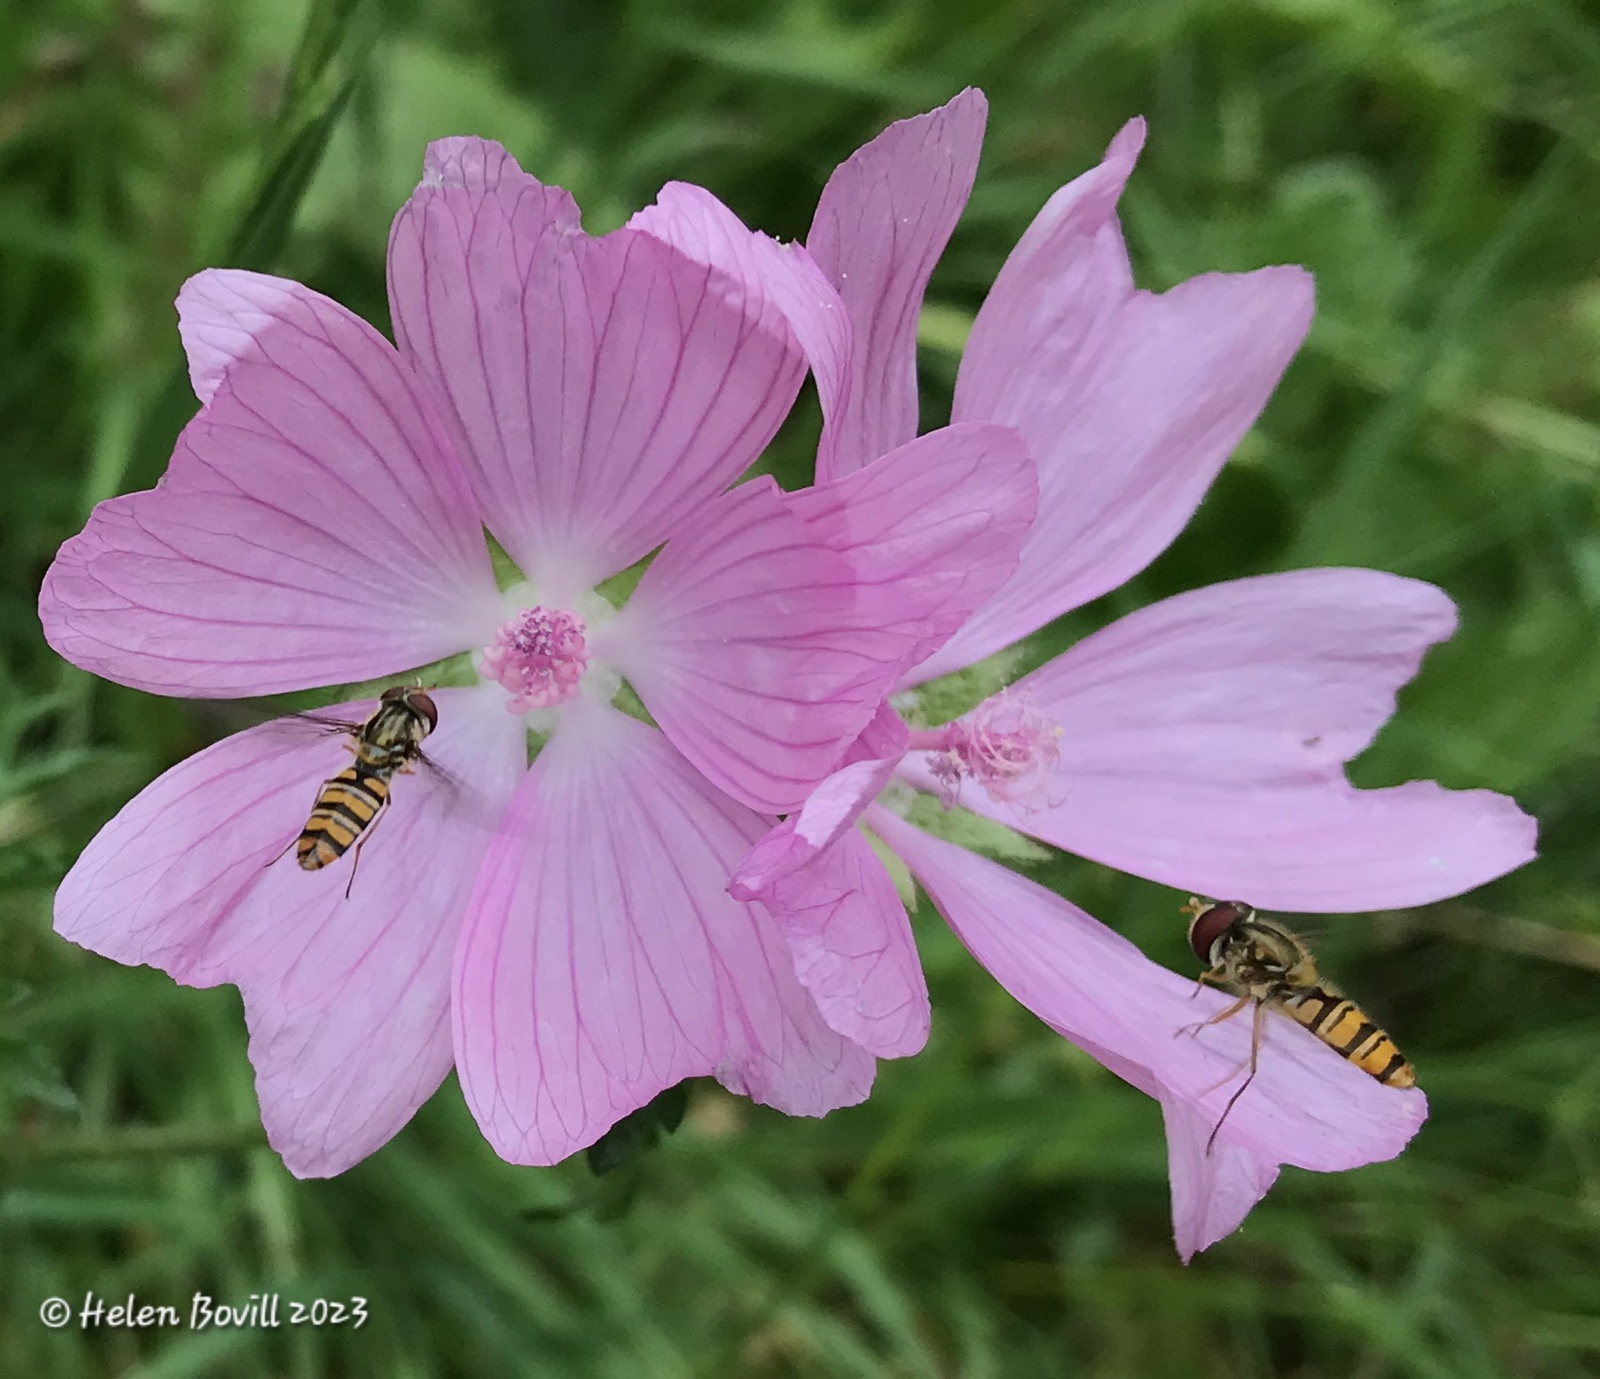 The pink flowers of the Musk mallow, with two Marmalade Hoverflies